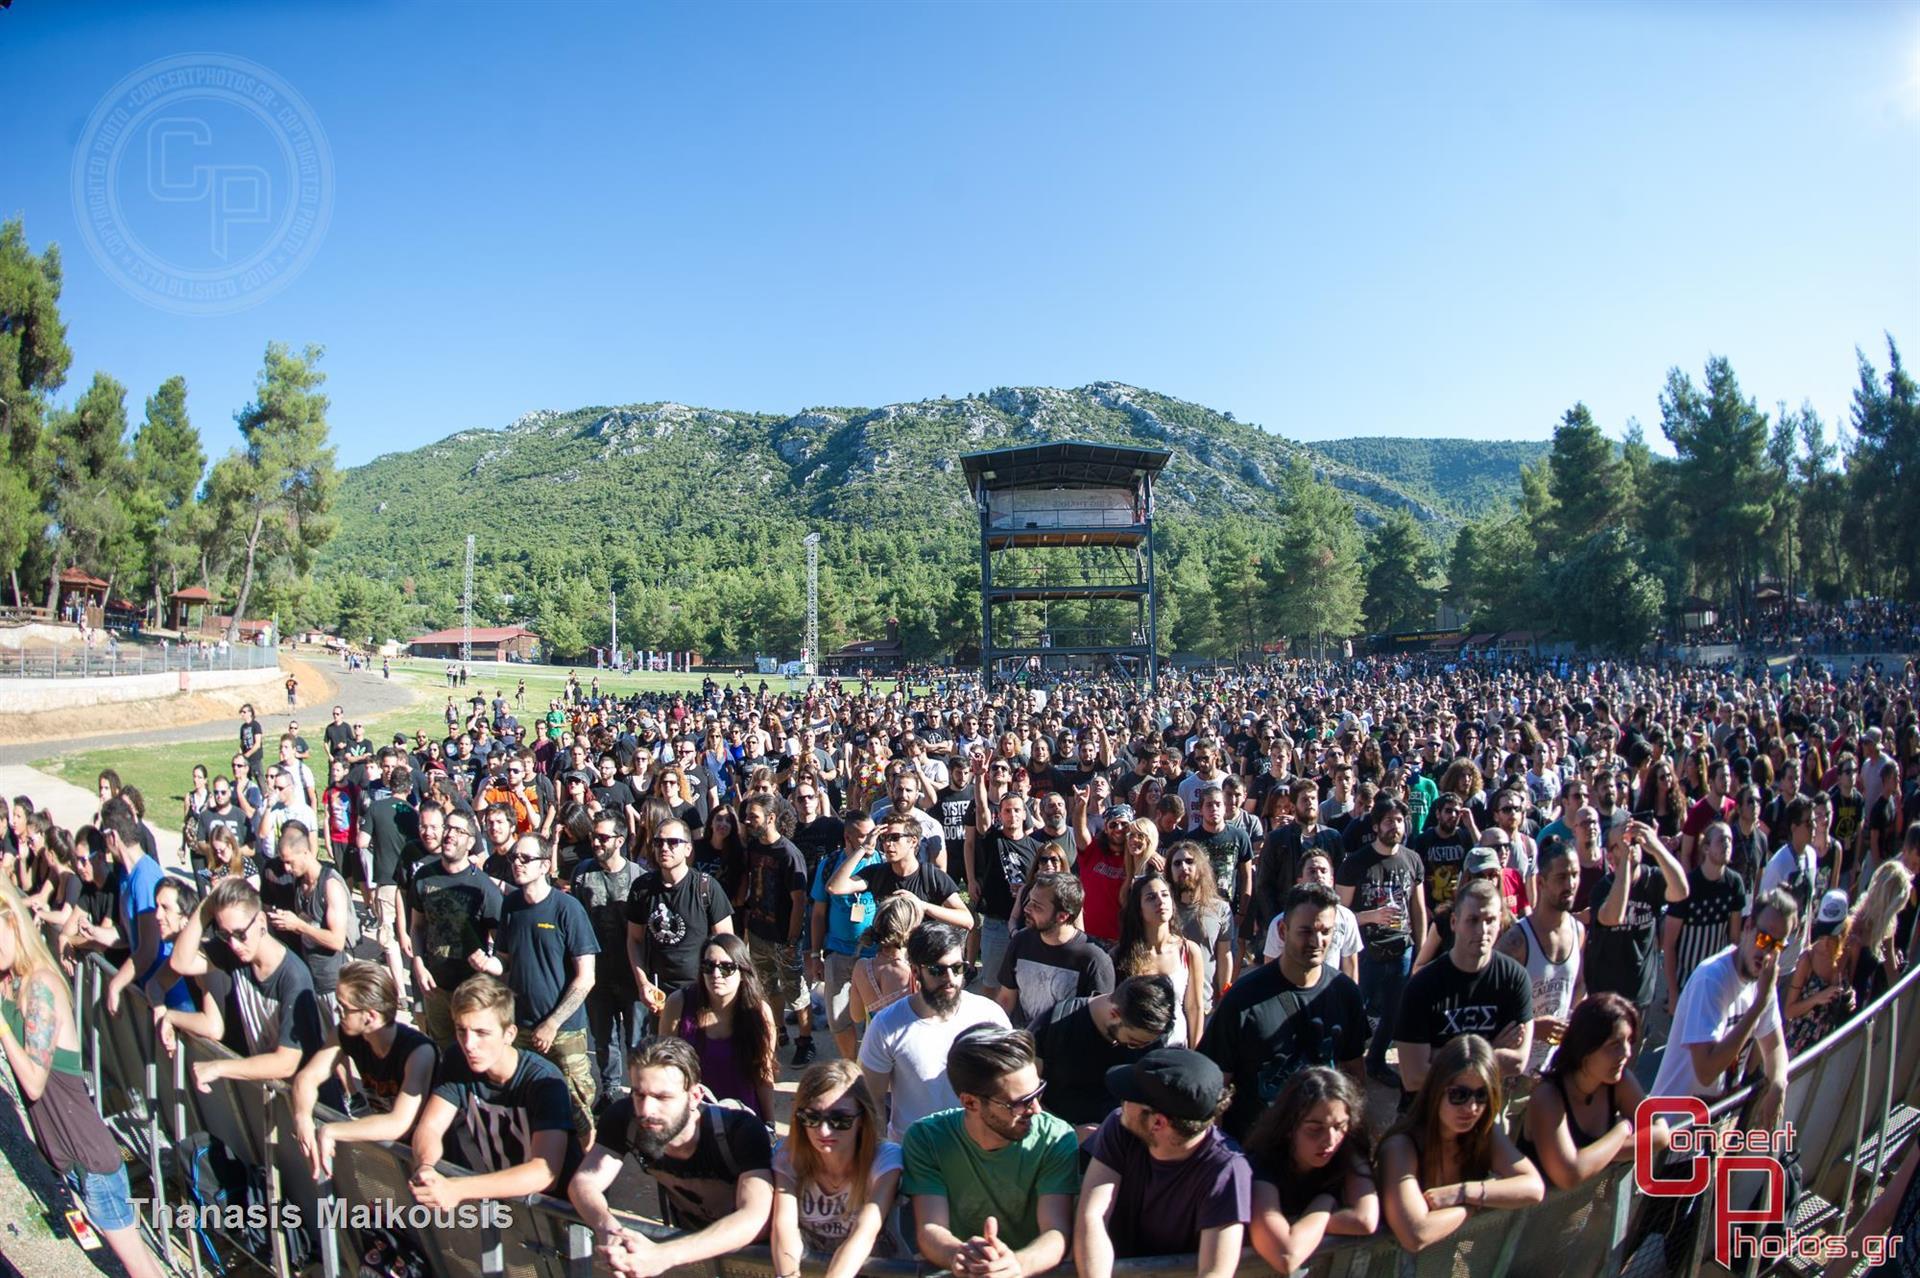 Rockwave 2015 - Day 3-Rockwave 2015 - Day 3 photographer: Thanasis Maikousis - ConcertPhotos - 20150704_1710_24